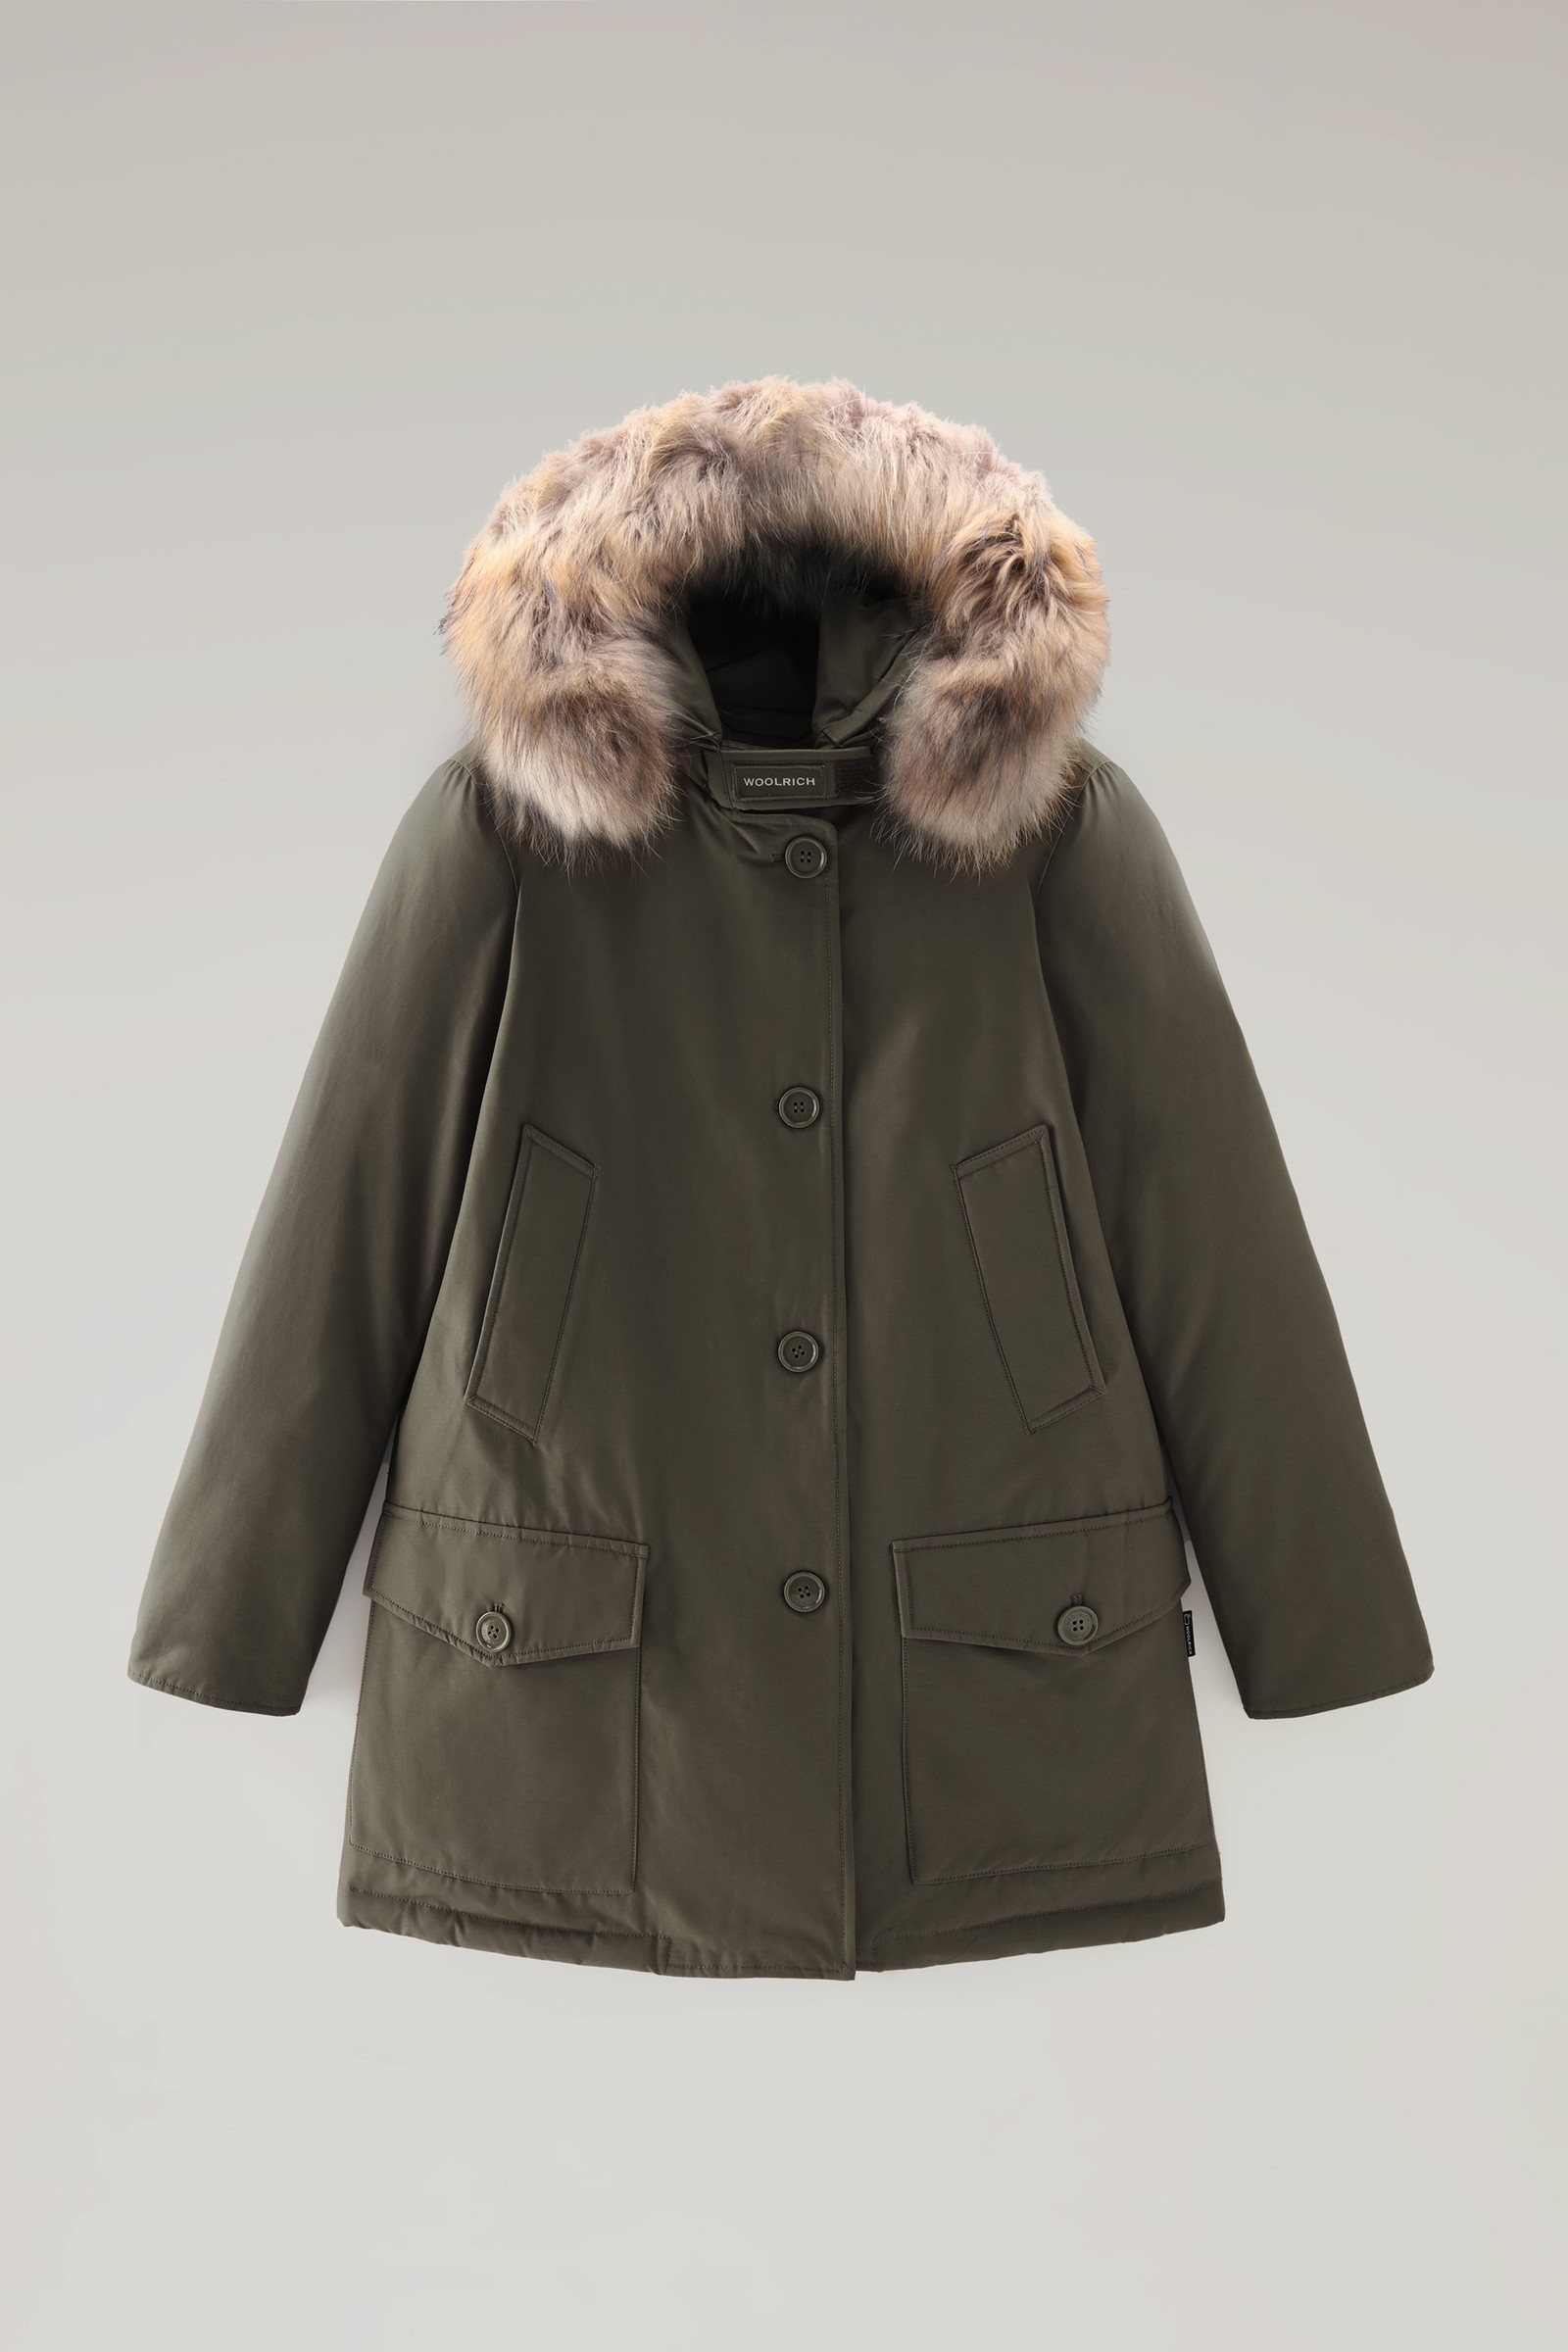 Mendicidad Cálculo Pepino Women's Arctic Parka in Ramar Cloth with Four Pockets and Detachable Fur  Trim Green | Woolrich USA